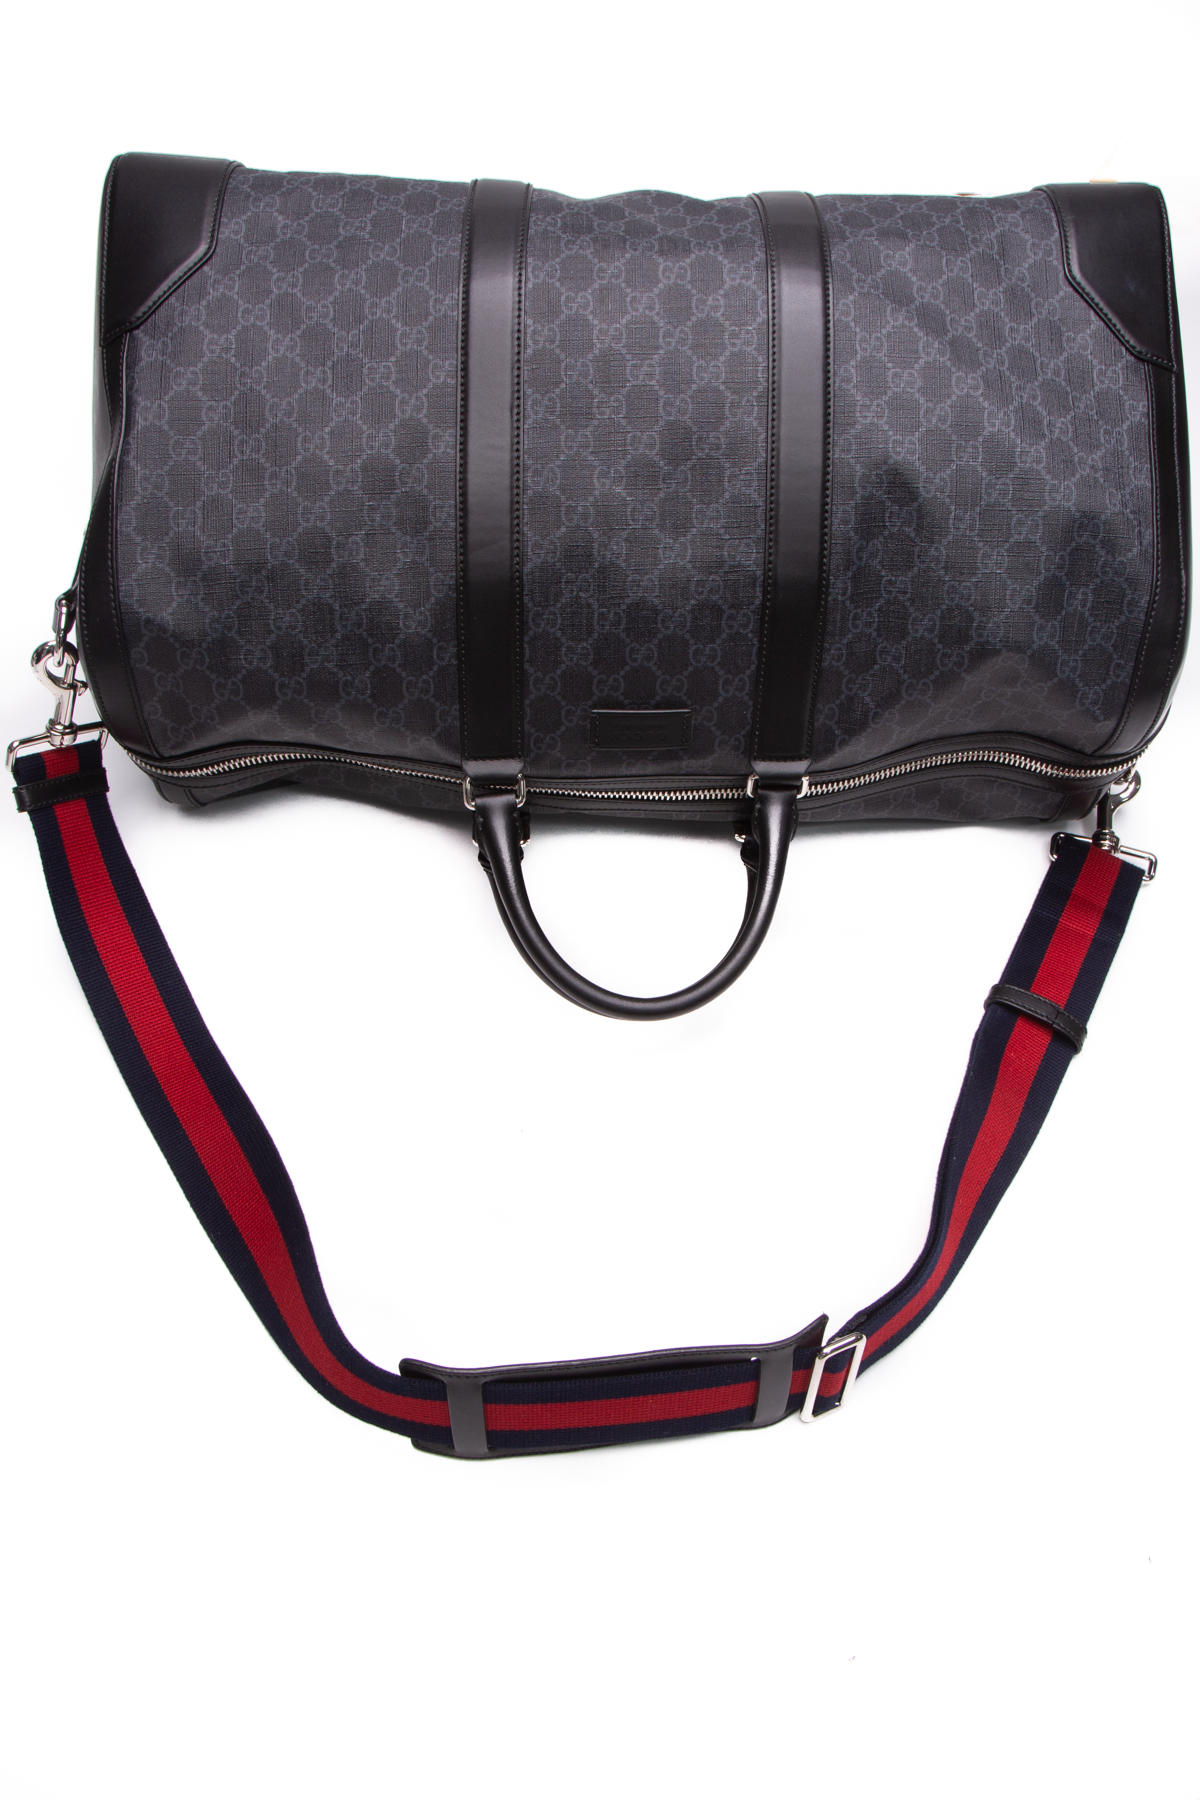 Gucci GG Black Carry-On Duffle Bag